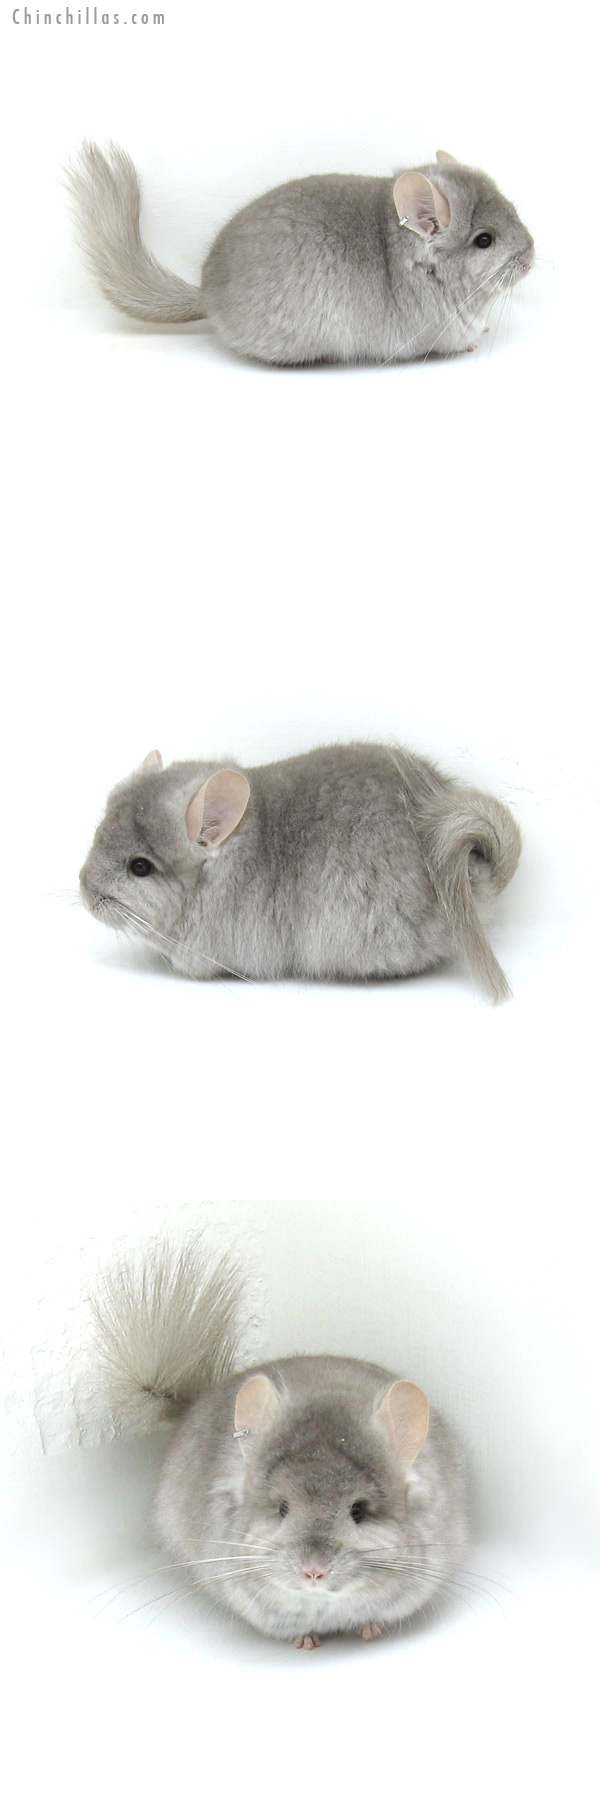 Chinchilla or related item offered for sale or export on Chinchillas.com - 12043 Exceptional Beige Royal Persian Angora Female Chinchilla